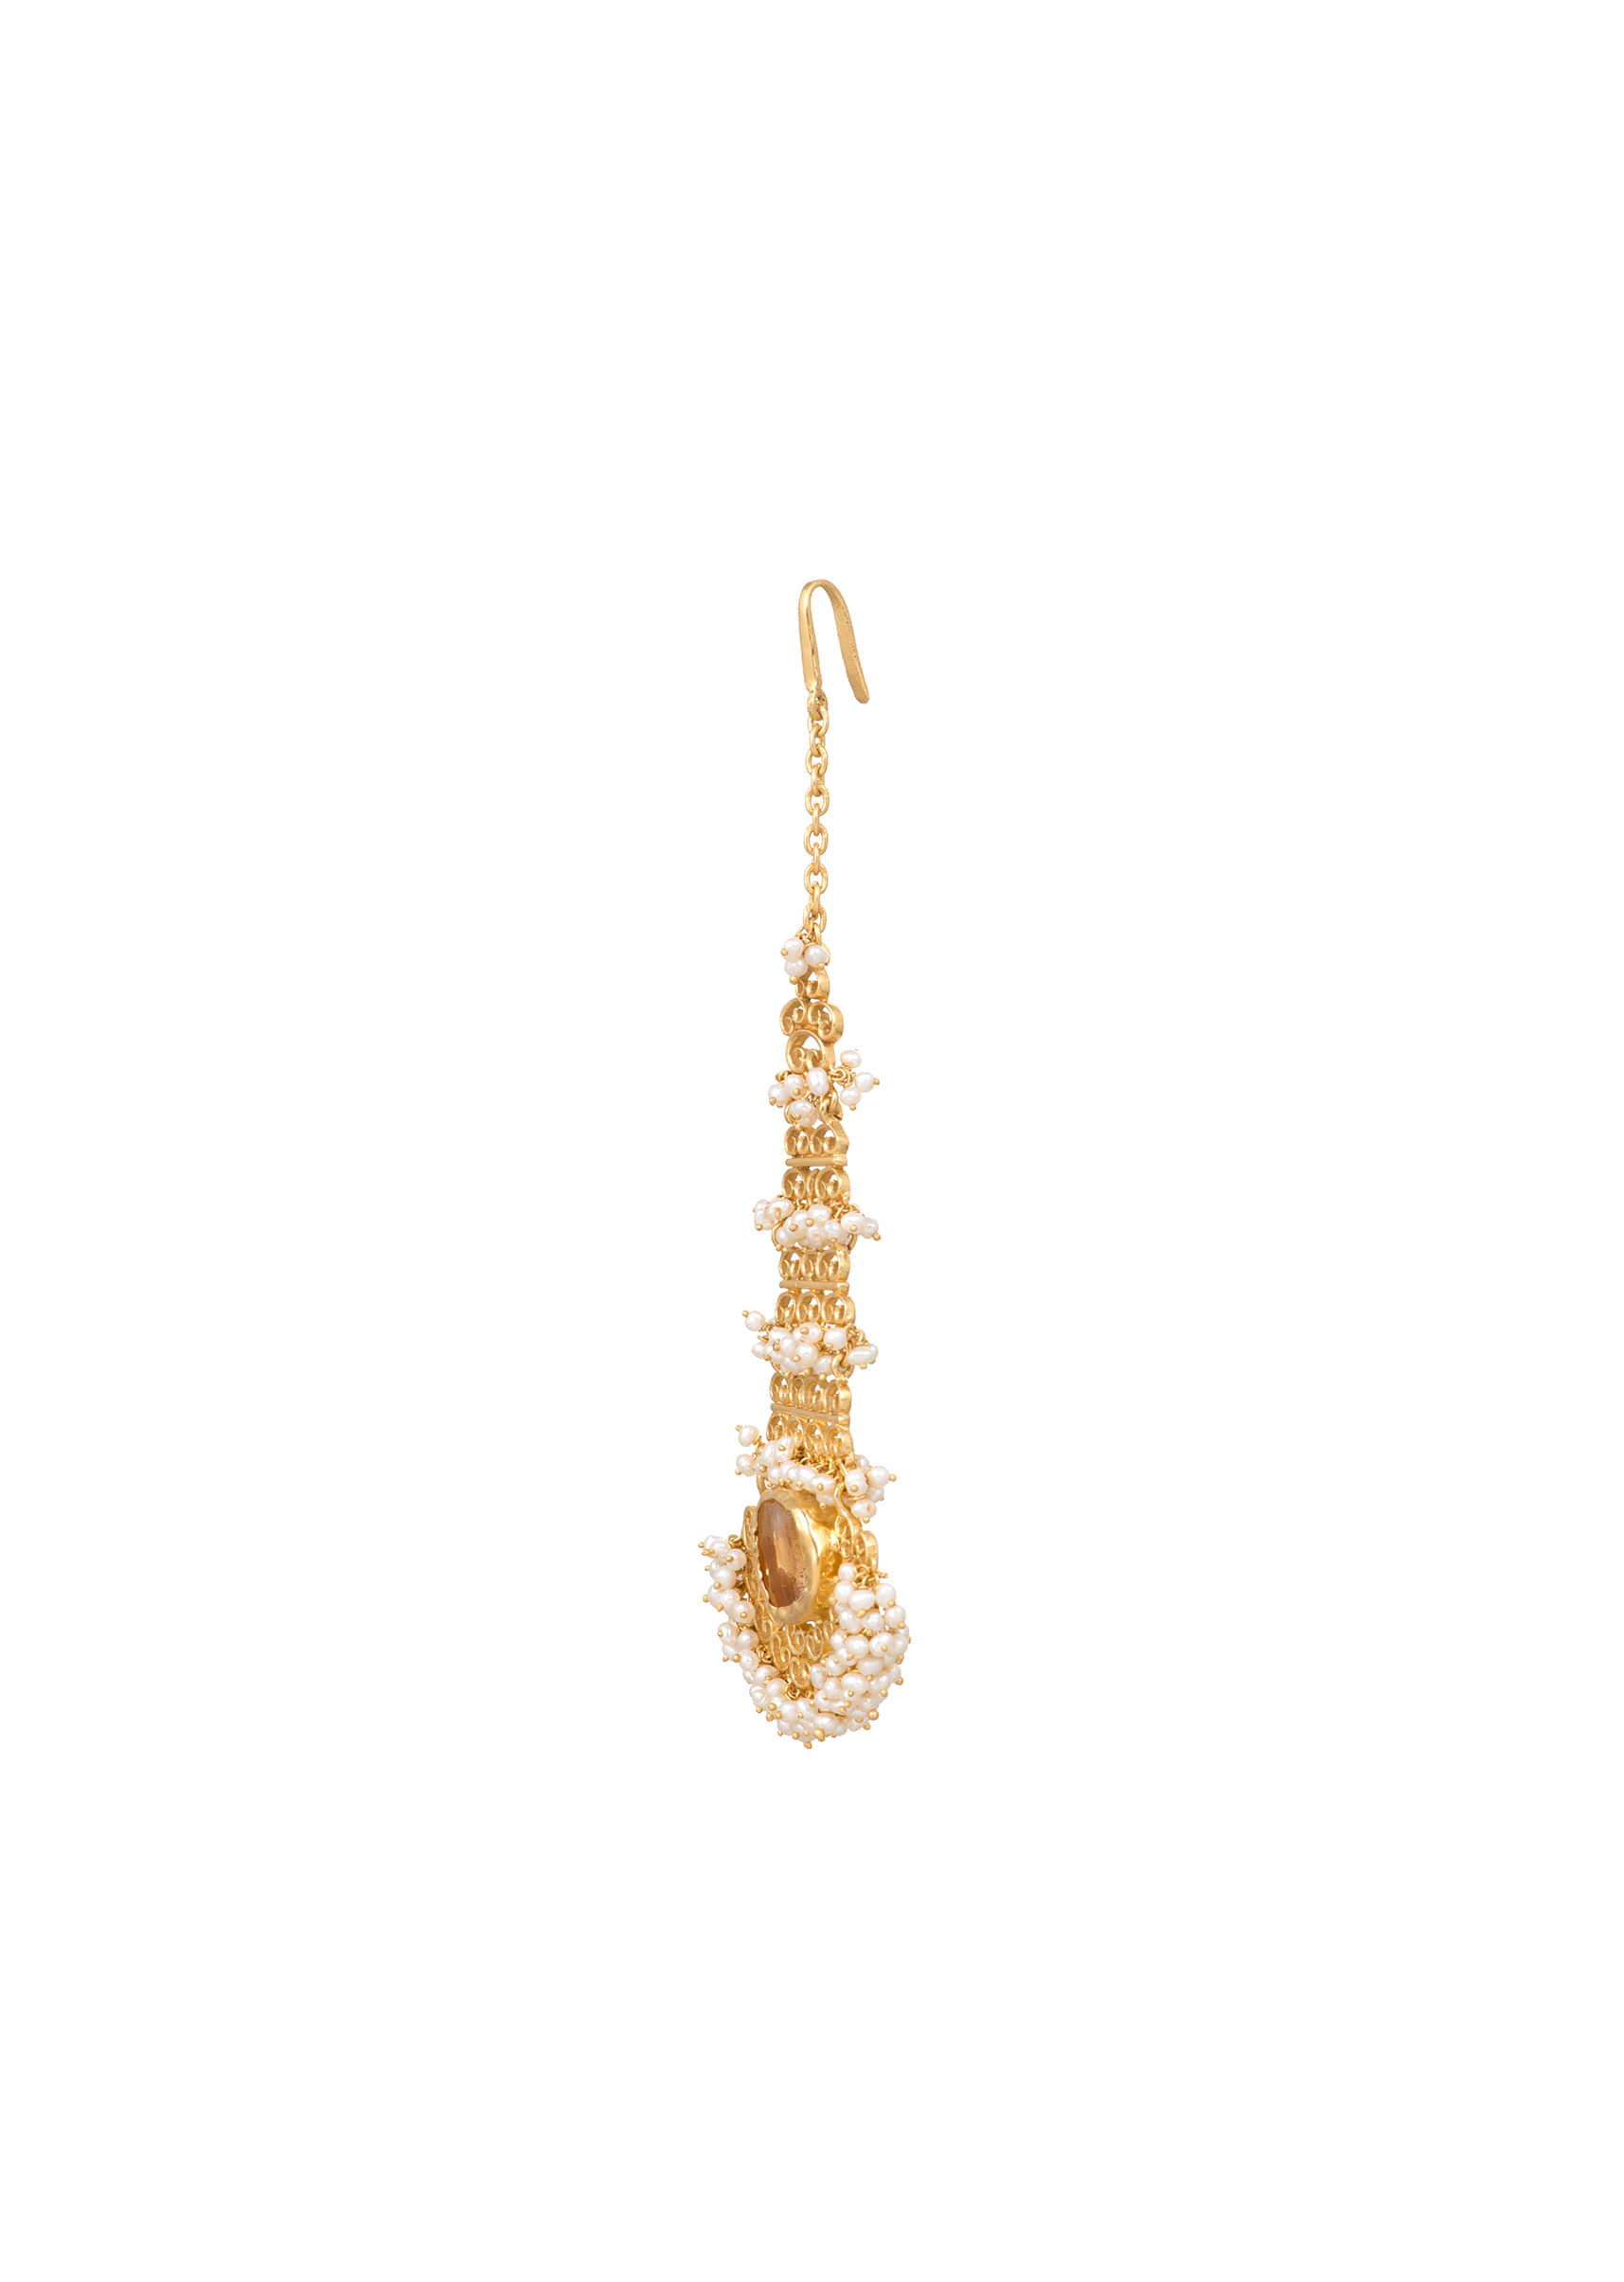 Gold Plated Maang Tika With Uncut Citrine Along With Carved Filigree Design And Pearls By Zariin